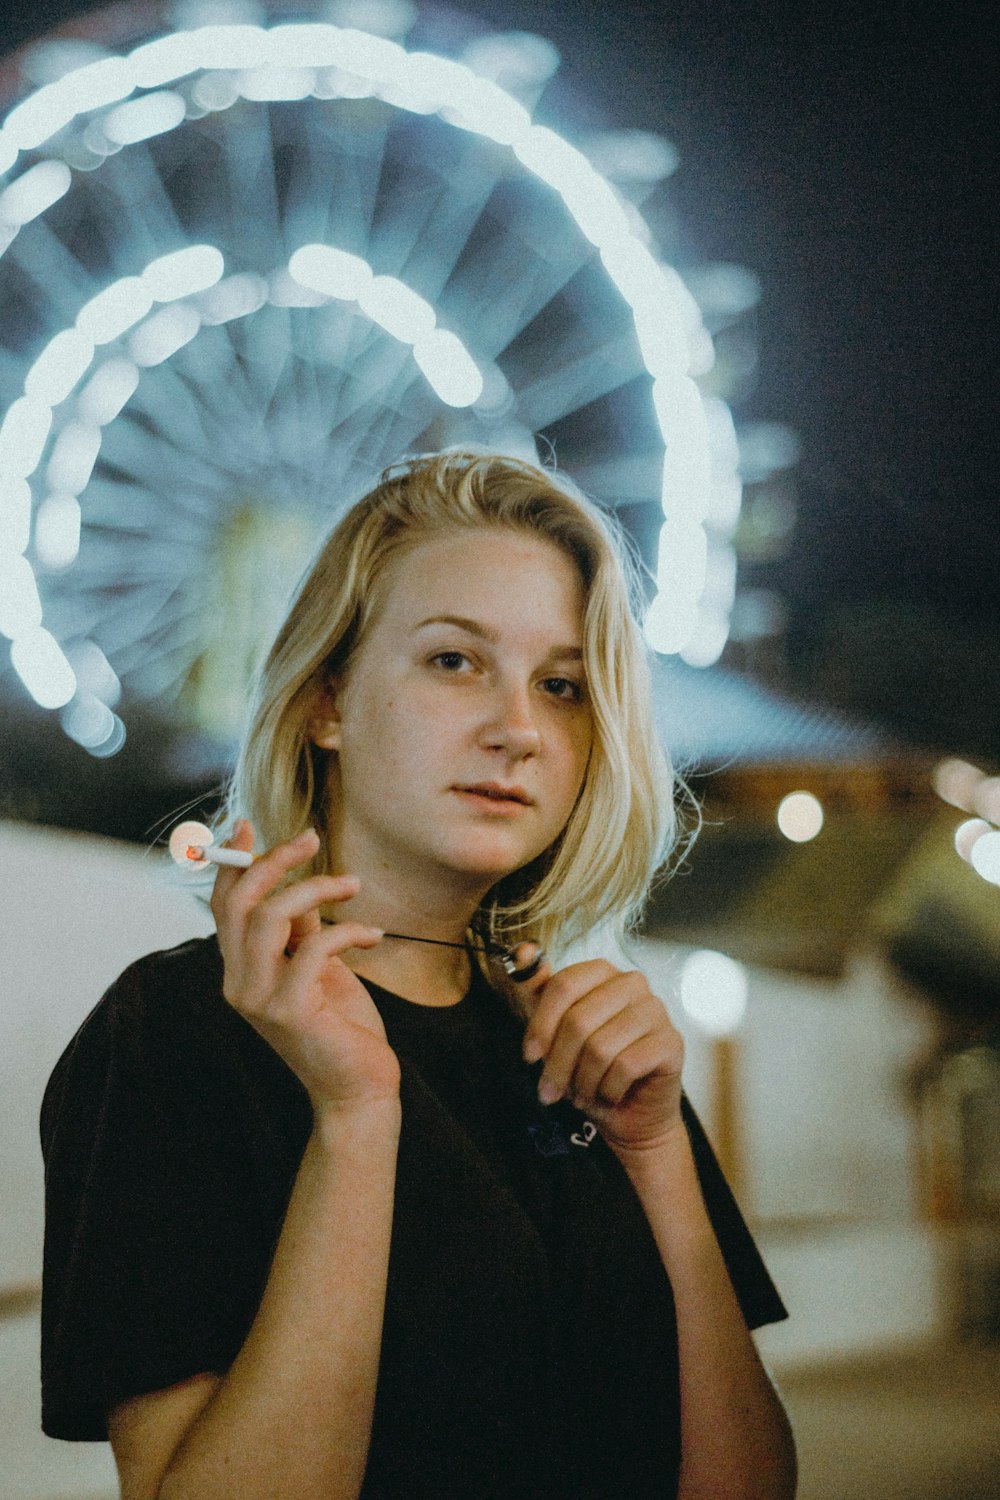 a woman standing in front of a ferris wheel at night